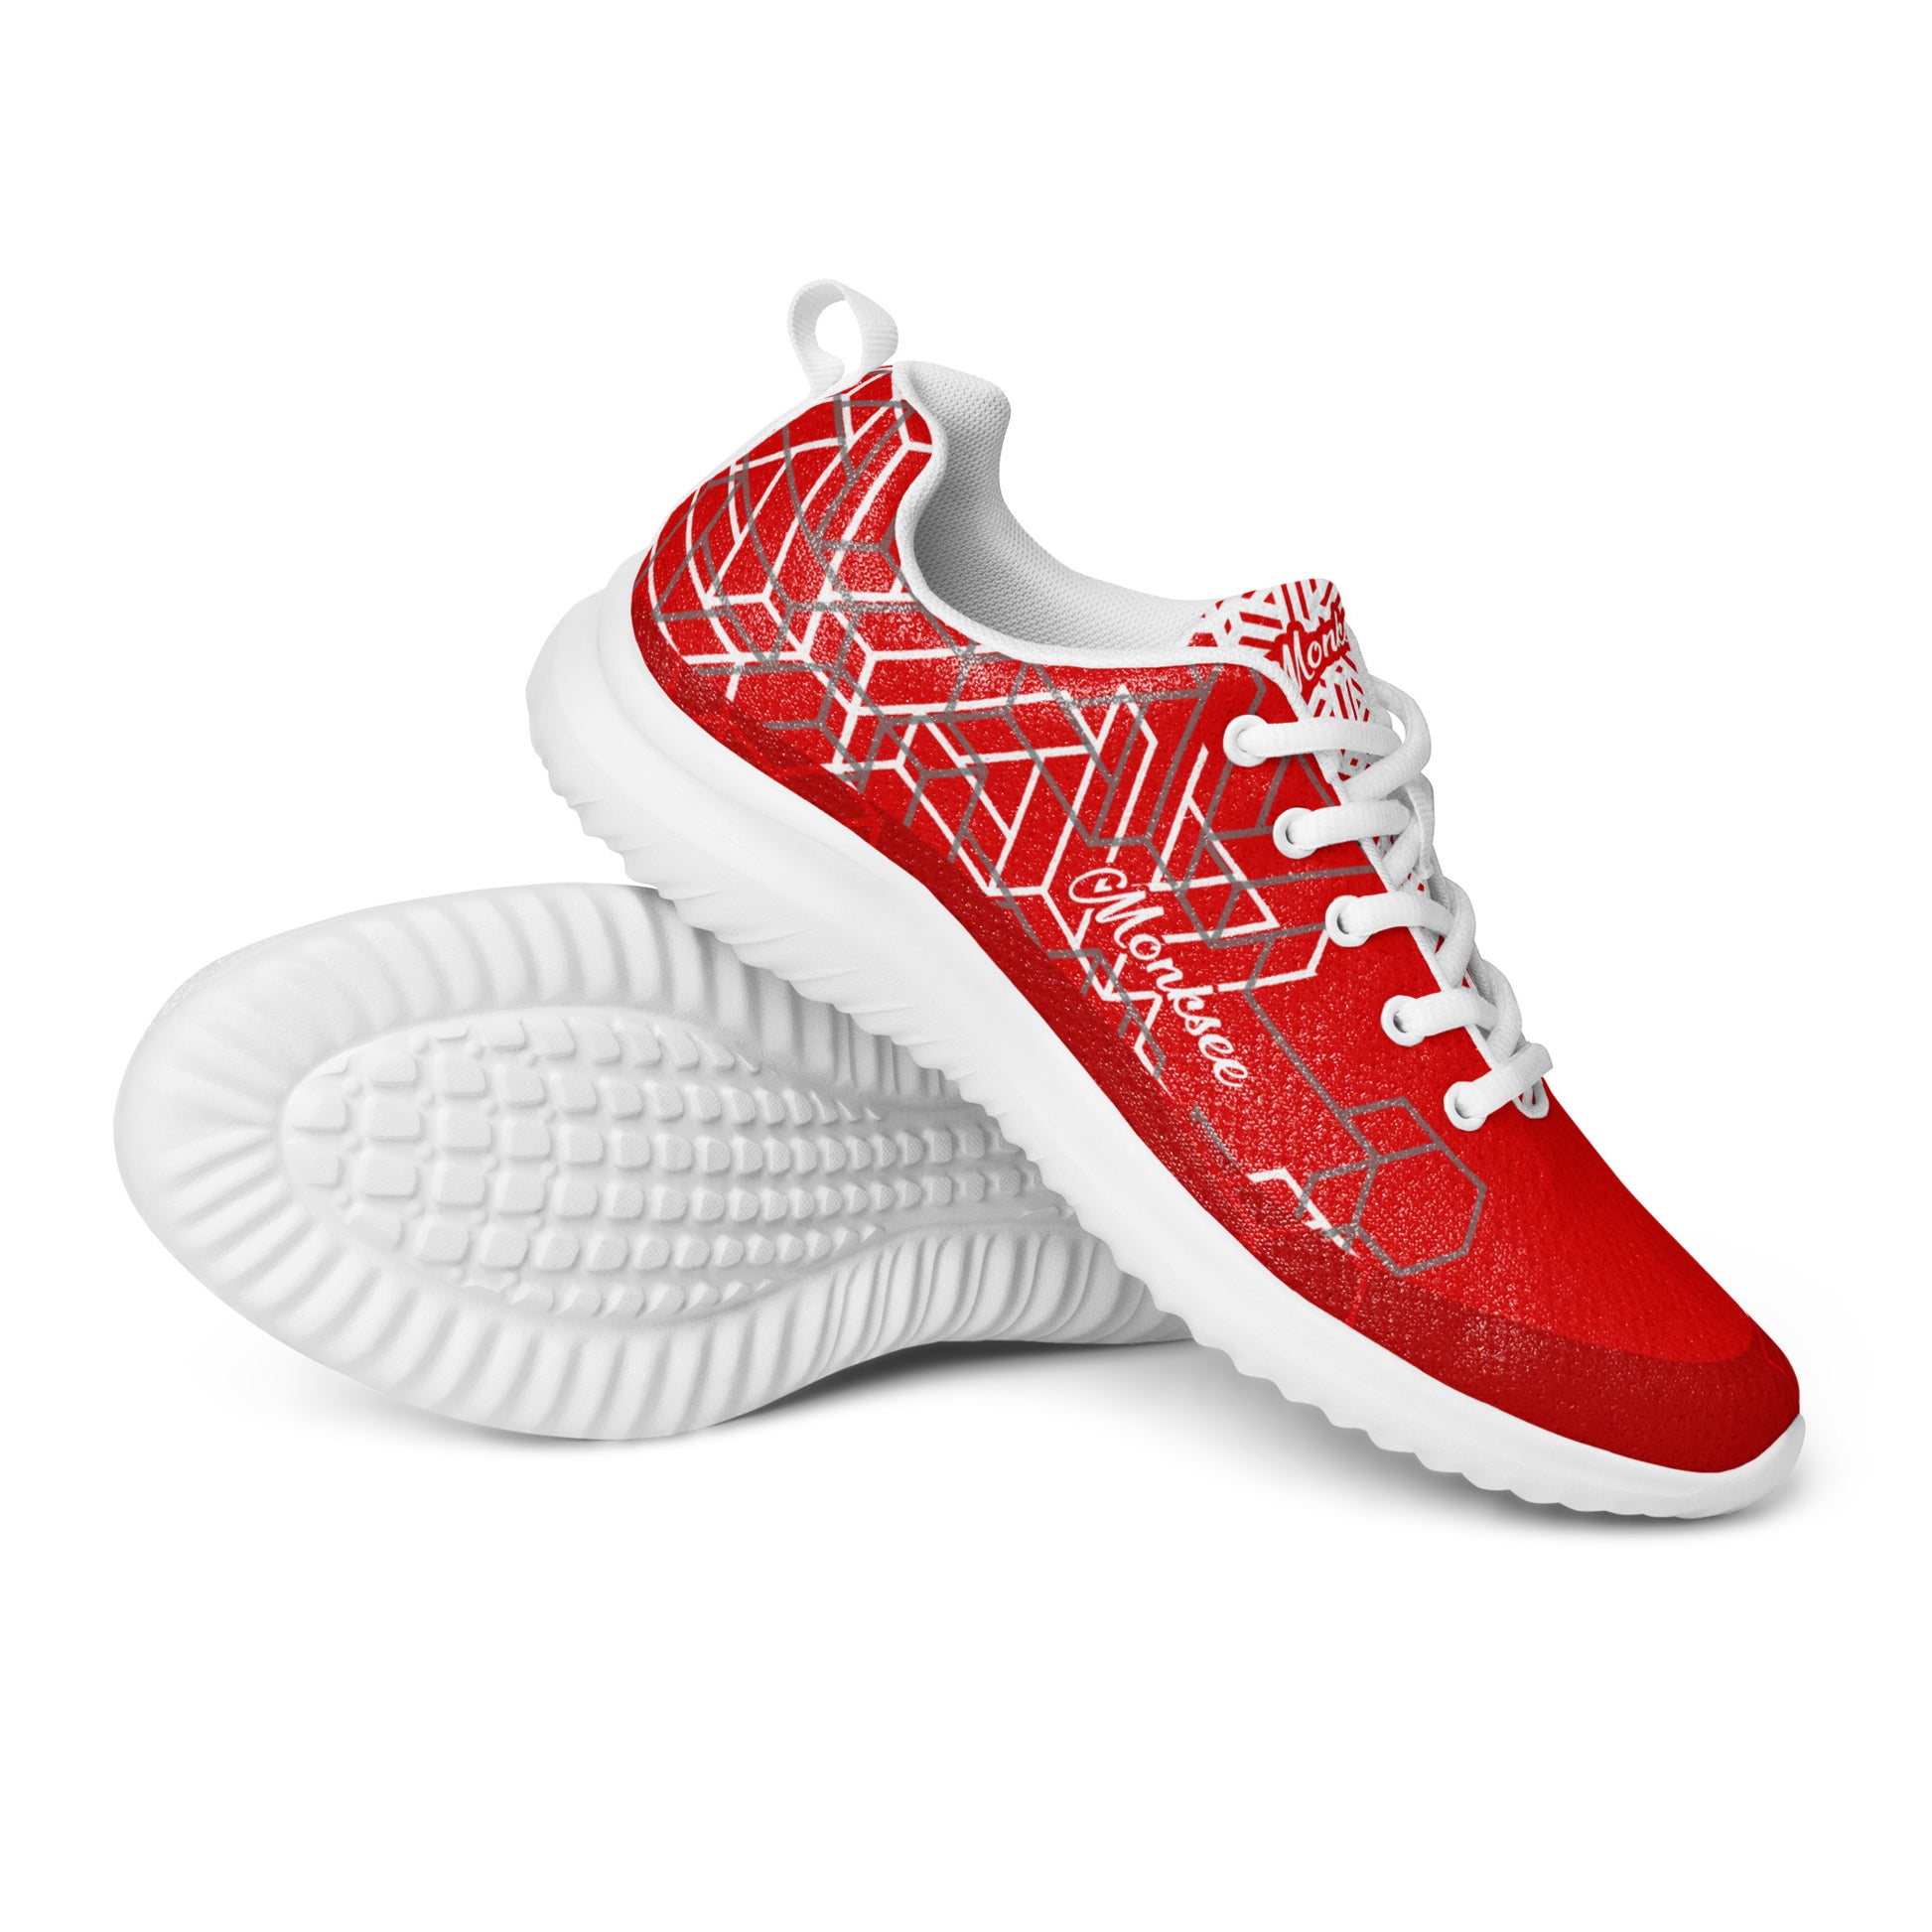 Monksee ISO Men’s Sneakers (red).